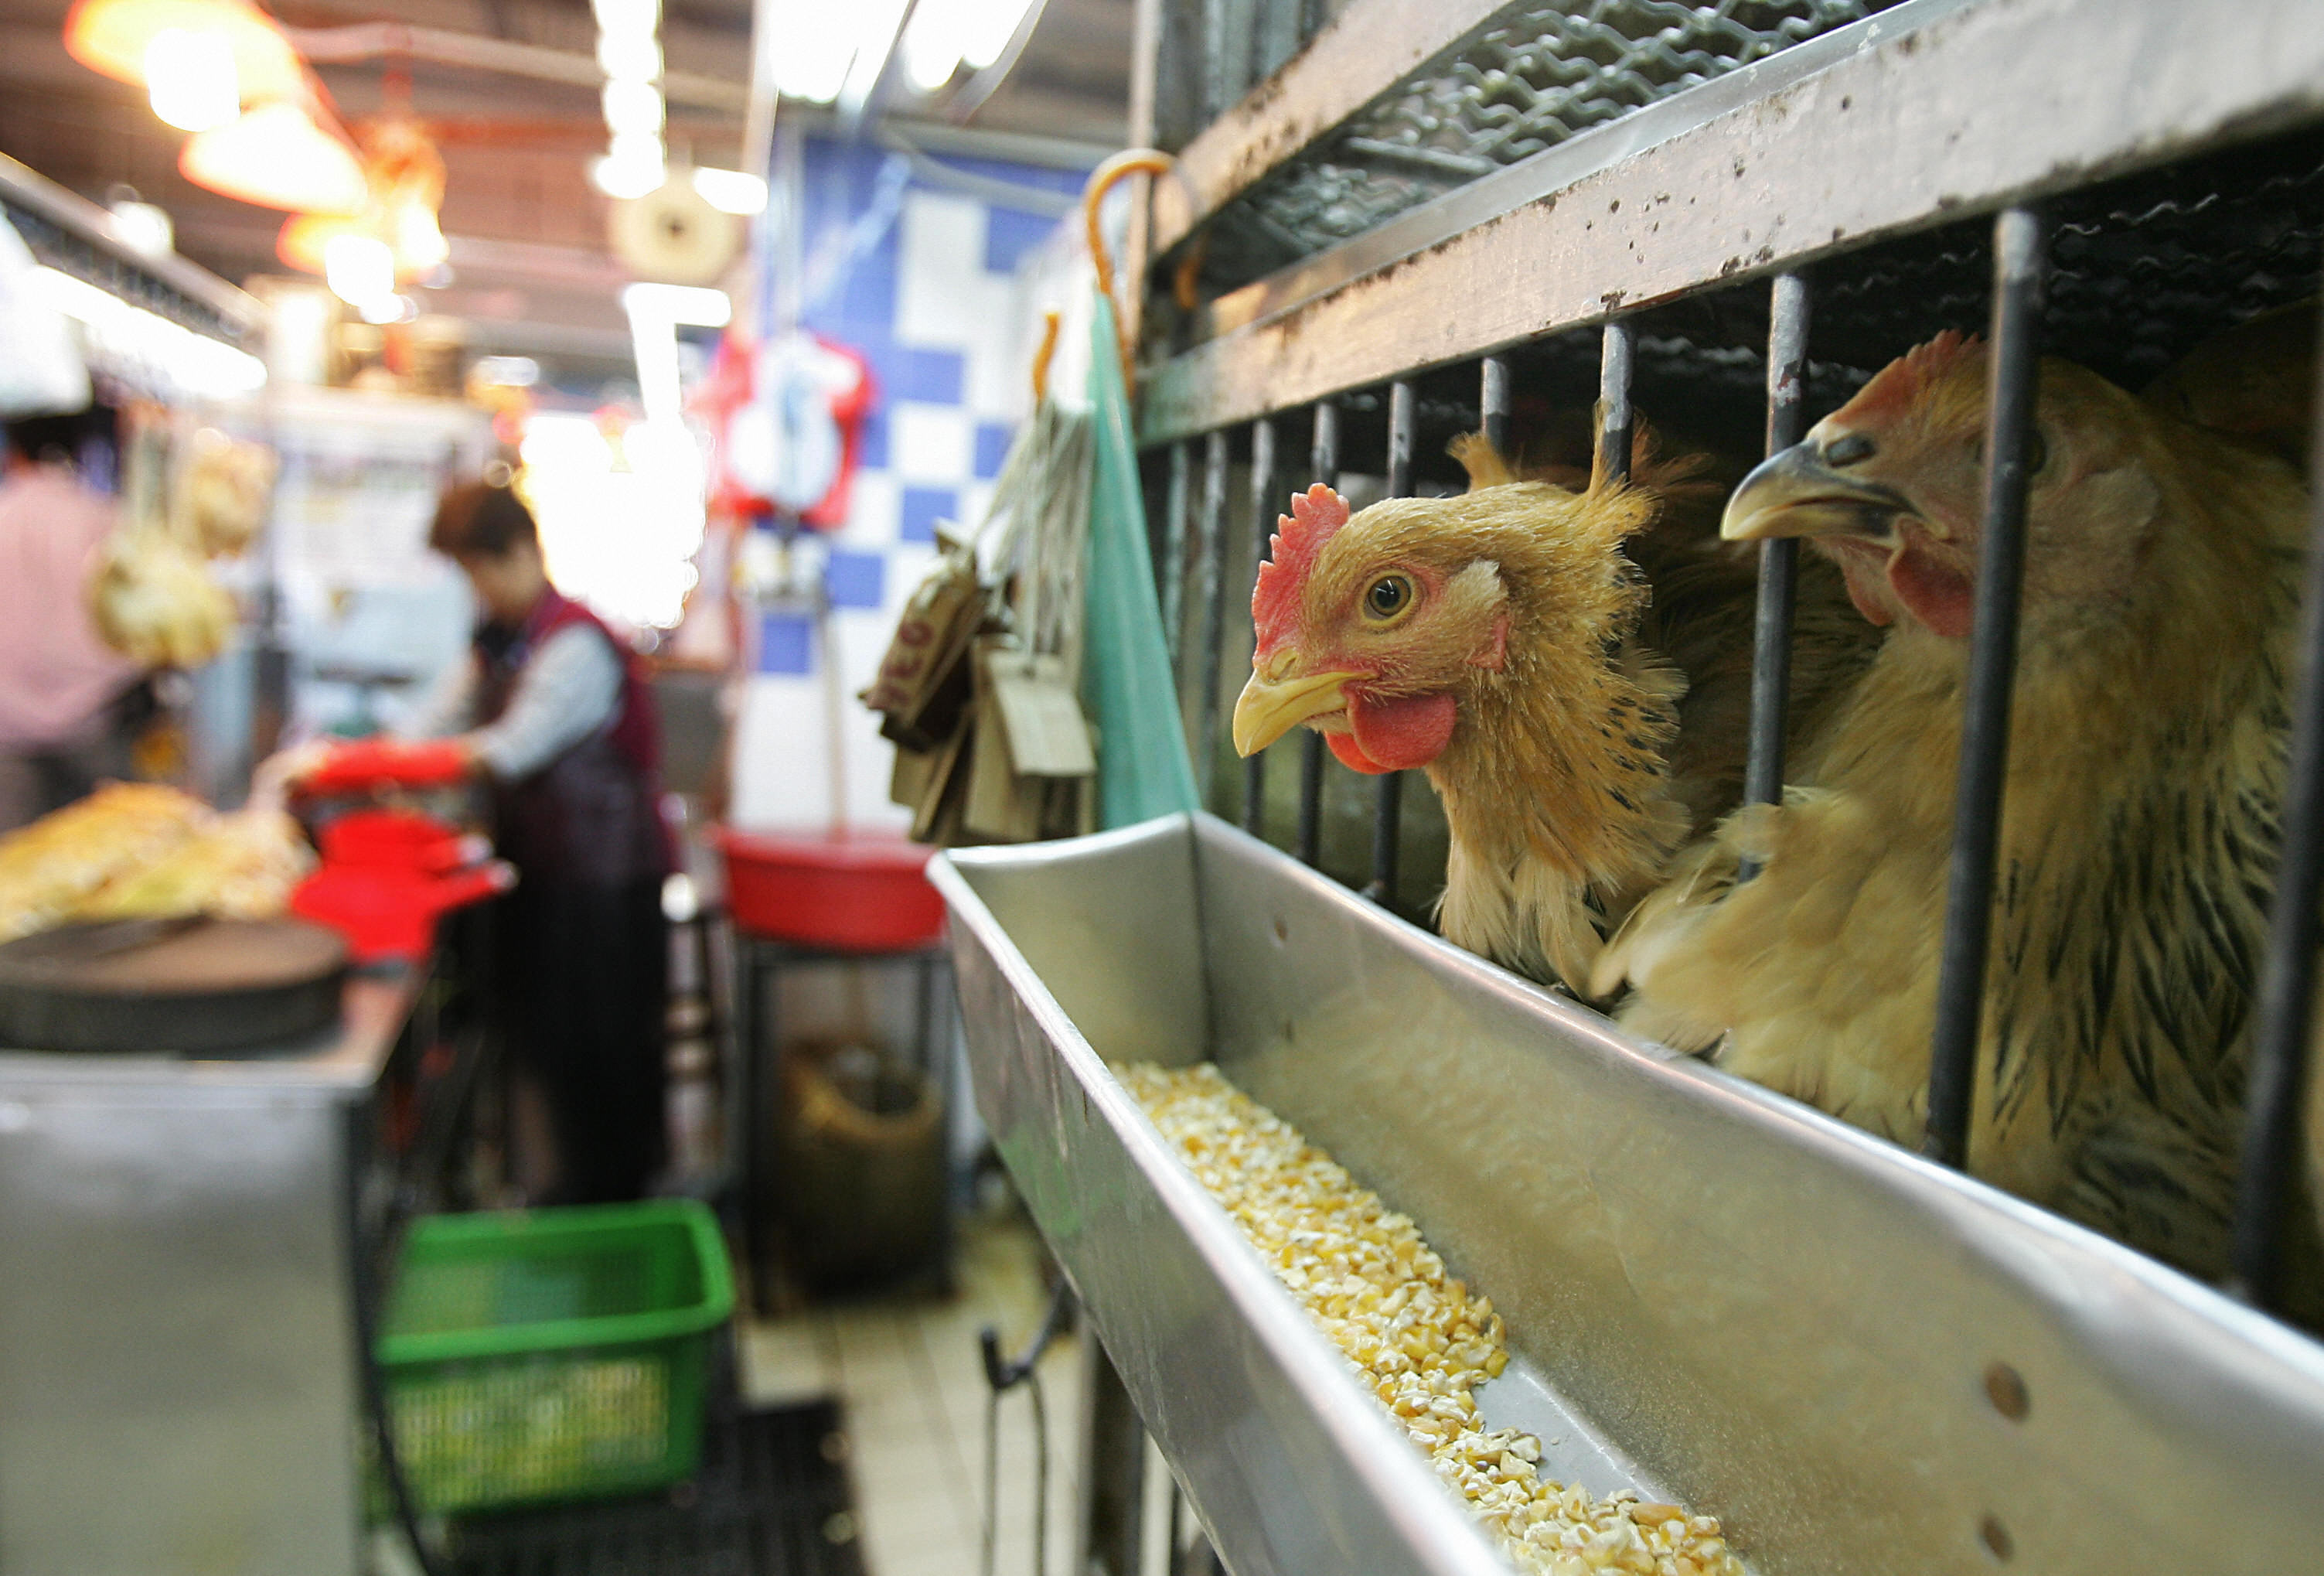 A market in Hong Kong featuring live chickens. (MIKE CLARKE/AFP via Getty Images)